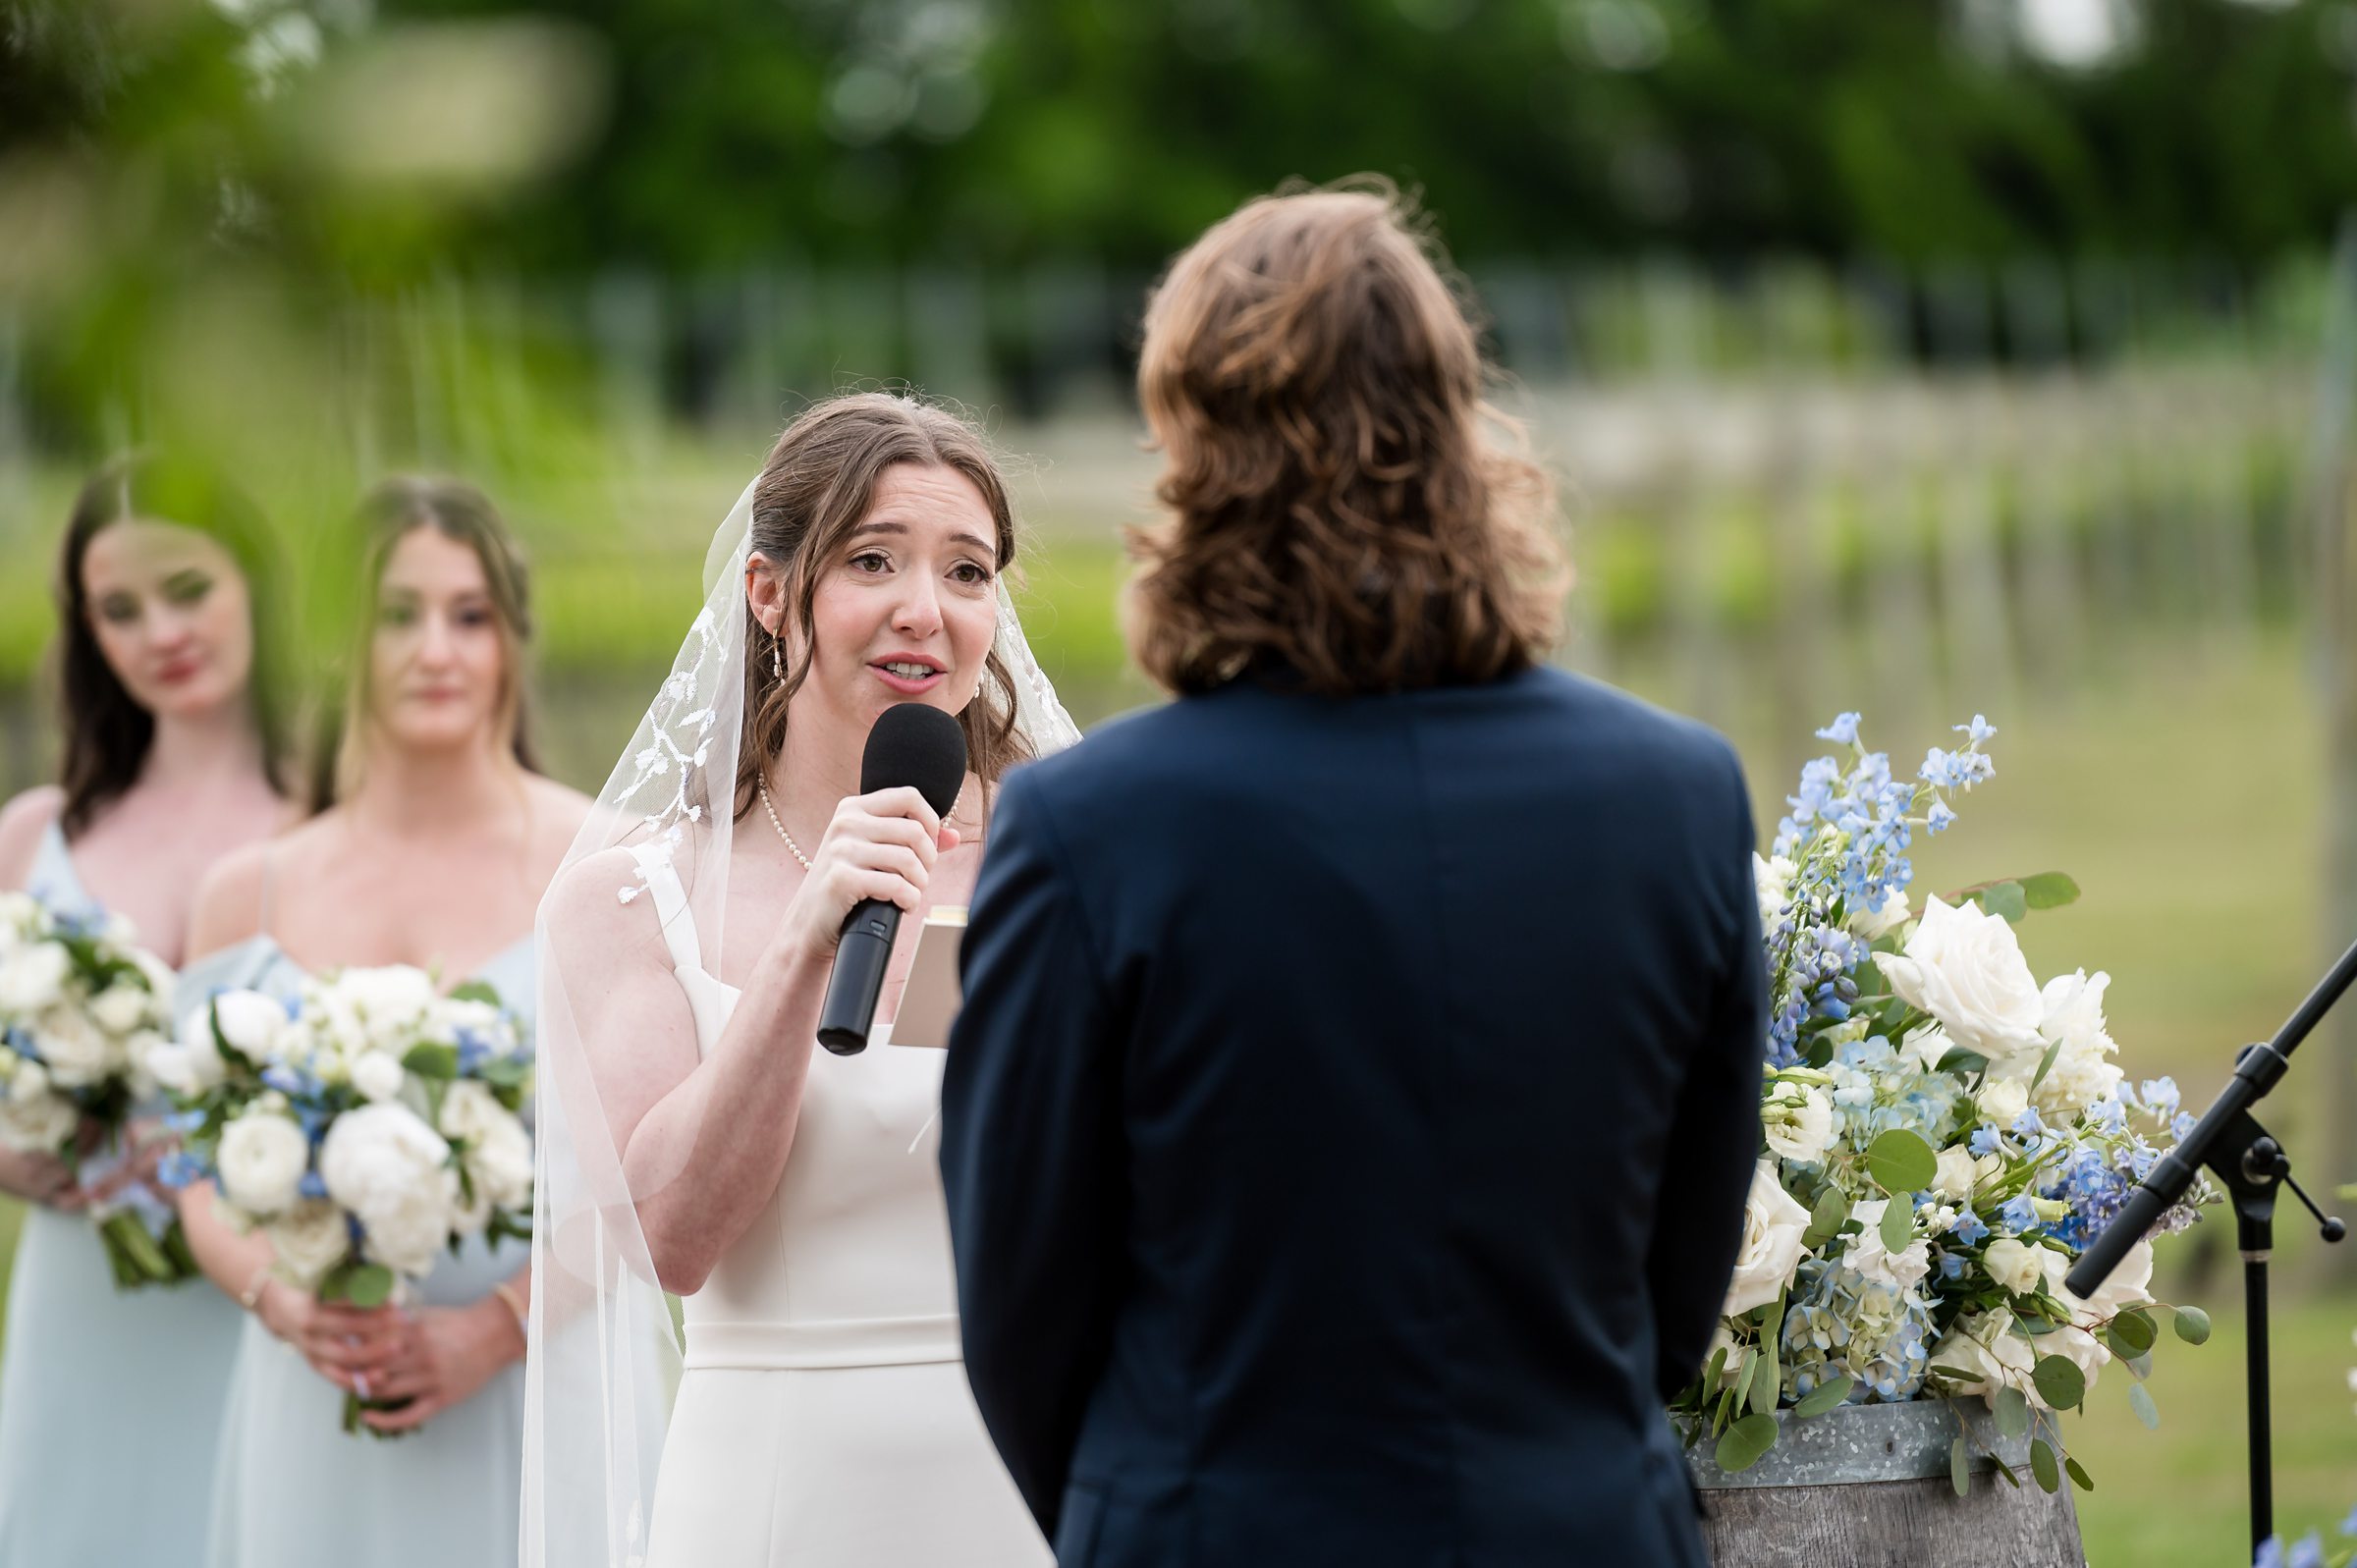 A bride speaks into a microphone during an outdoor wedding ceremony, with bridesmaids holding bouquets standing behind her.